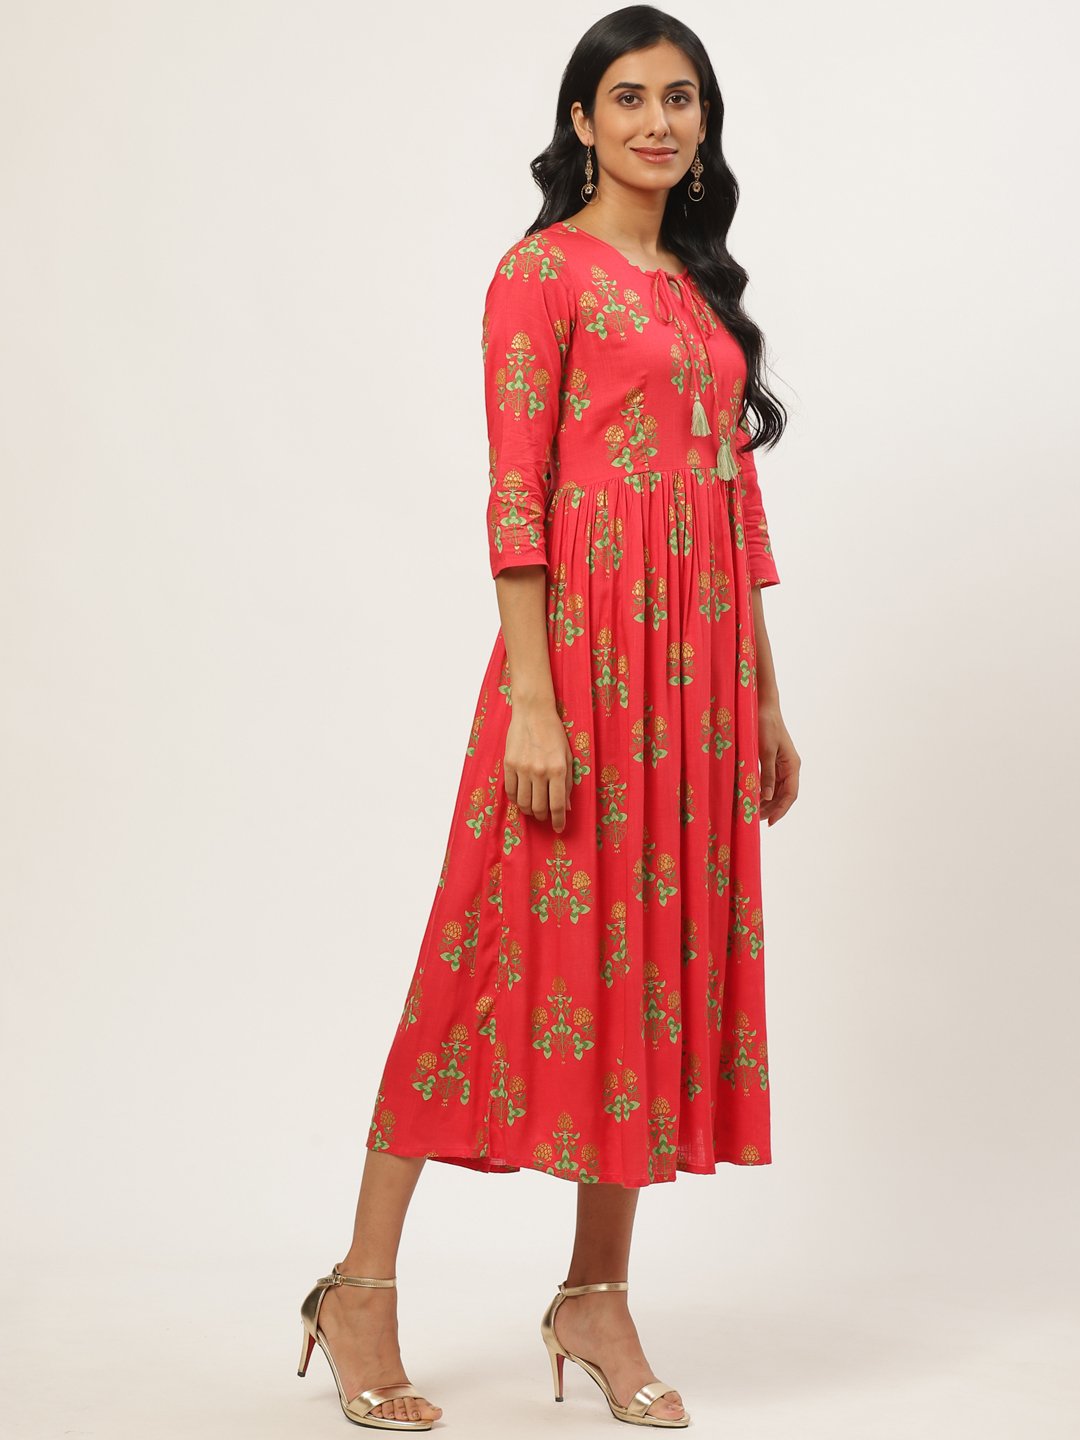 Women's Coral Floral Printed V-Neck Cotton Fit And Flare Dress - Nayo Clothing